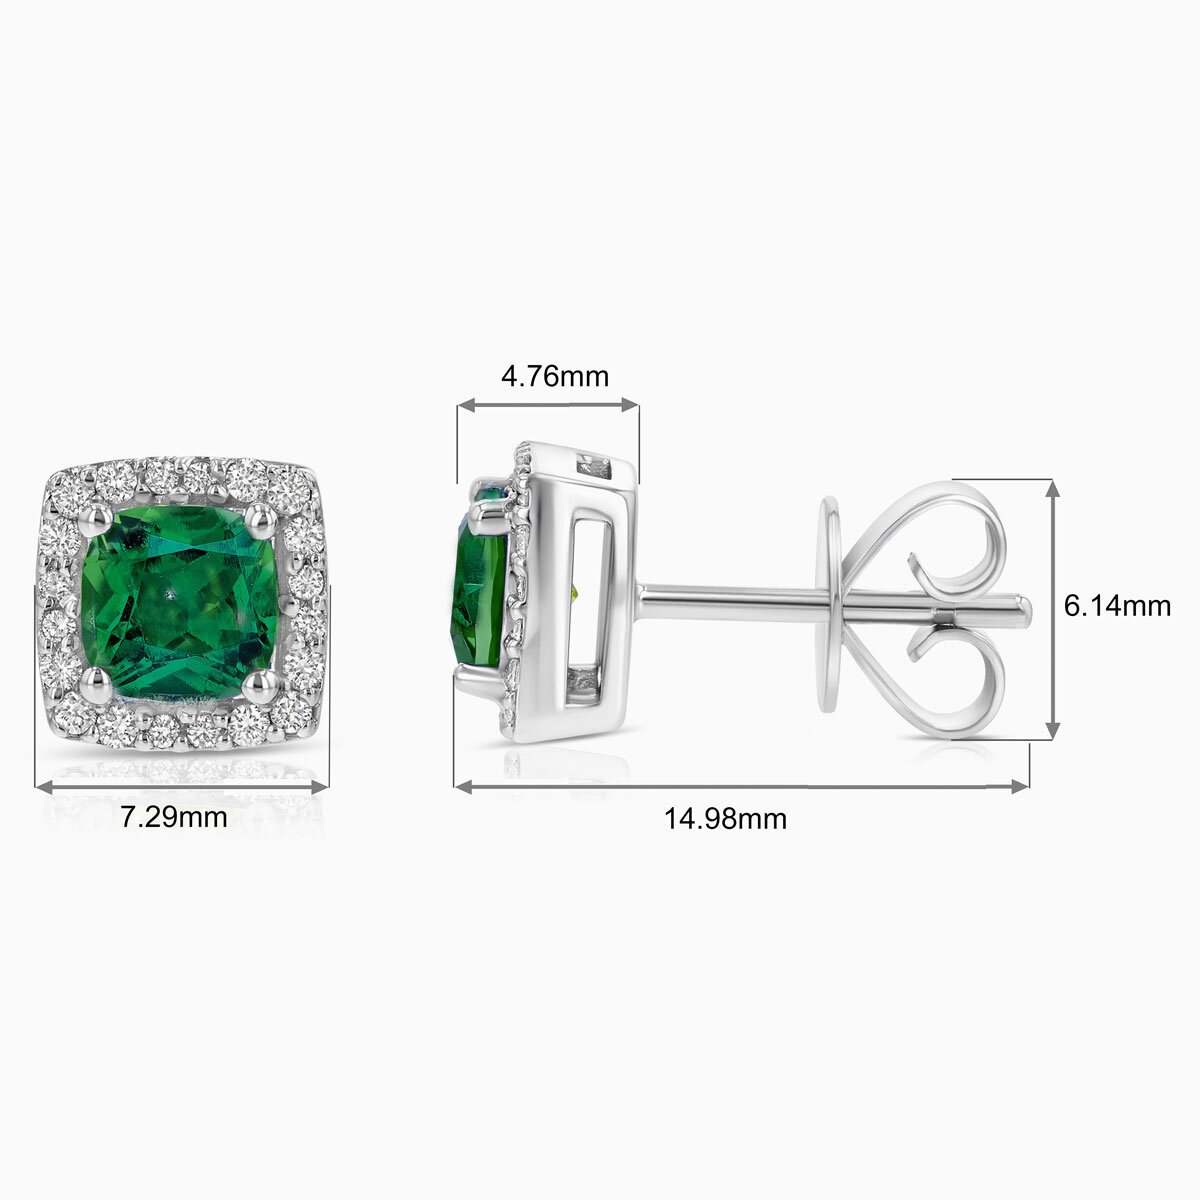 Cushion Cut Lab Emerald and 0.13ctw Diamond Stud Earrings, 14ct White Gold